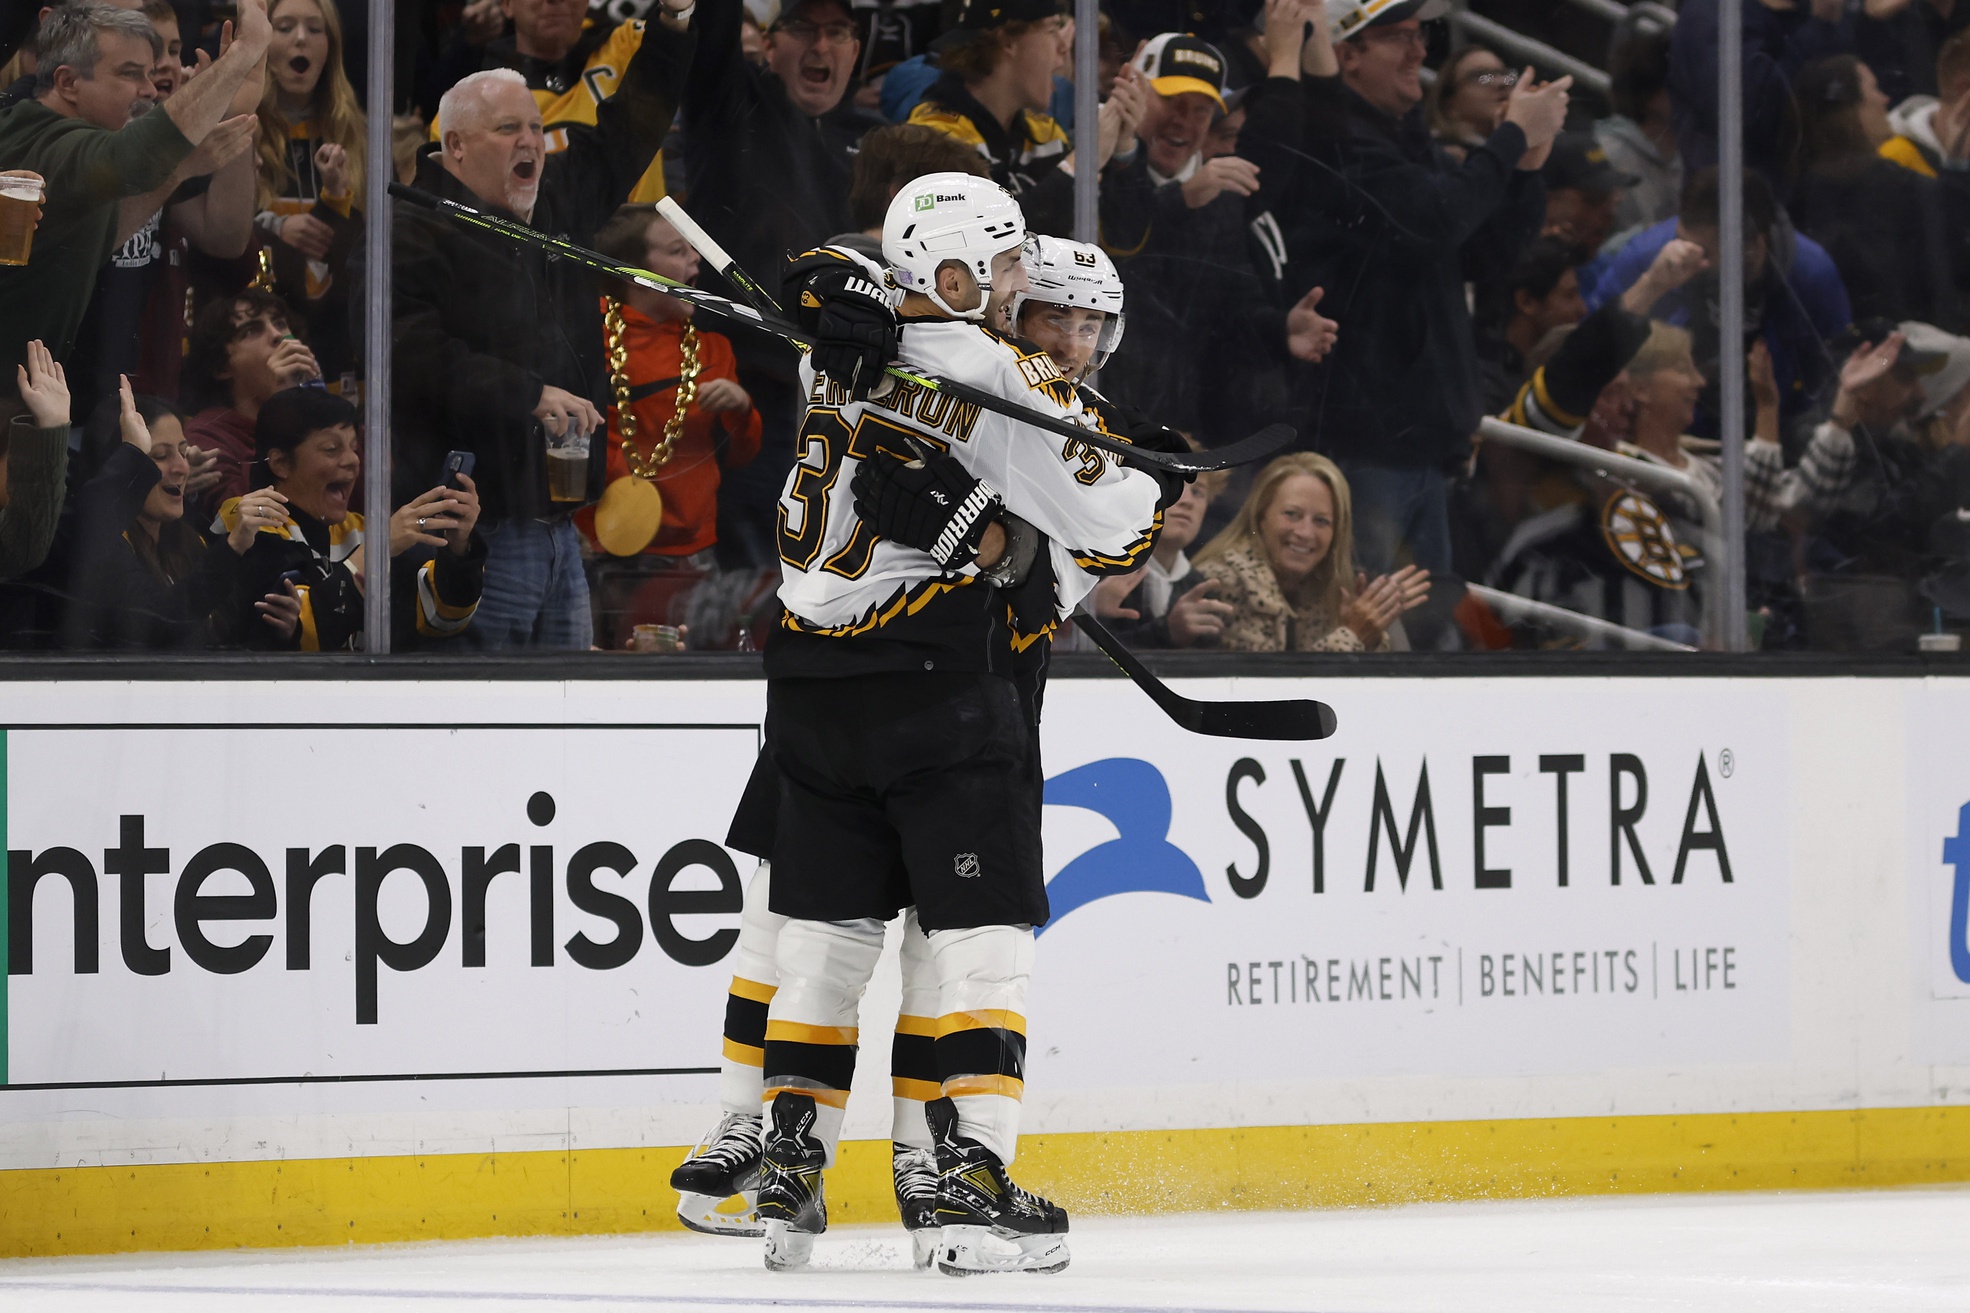 Nov 19, 2022; Boston, Massachusetts, USA; Boston Bruins center Patrice Bergeron (37) gets a hug from left wing Brad Marchand (63) after he scored against the Chicago Blackhawks during the second period at TD Garden. Mandatory Credit: Winslow Townson/USA TODAY Sports